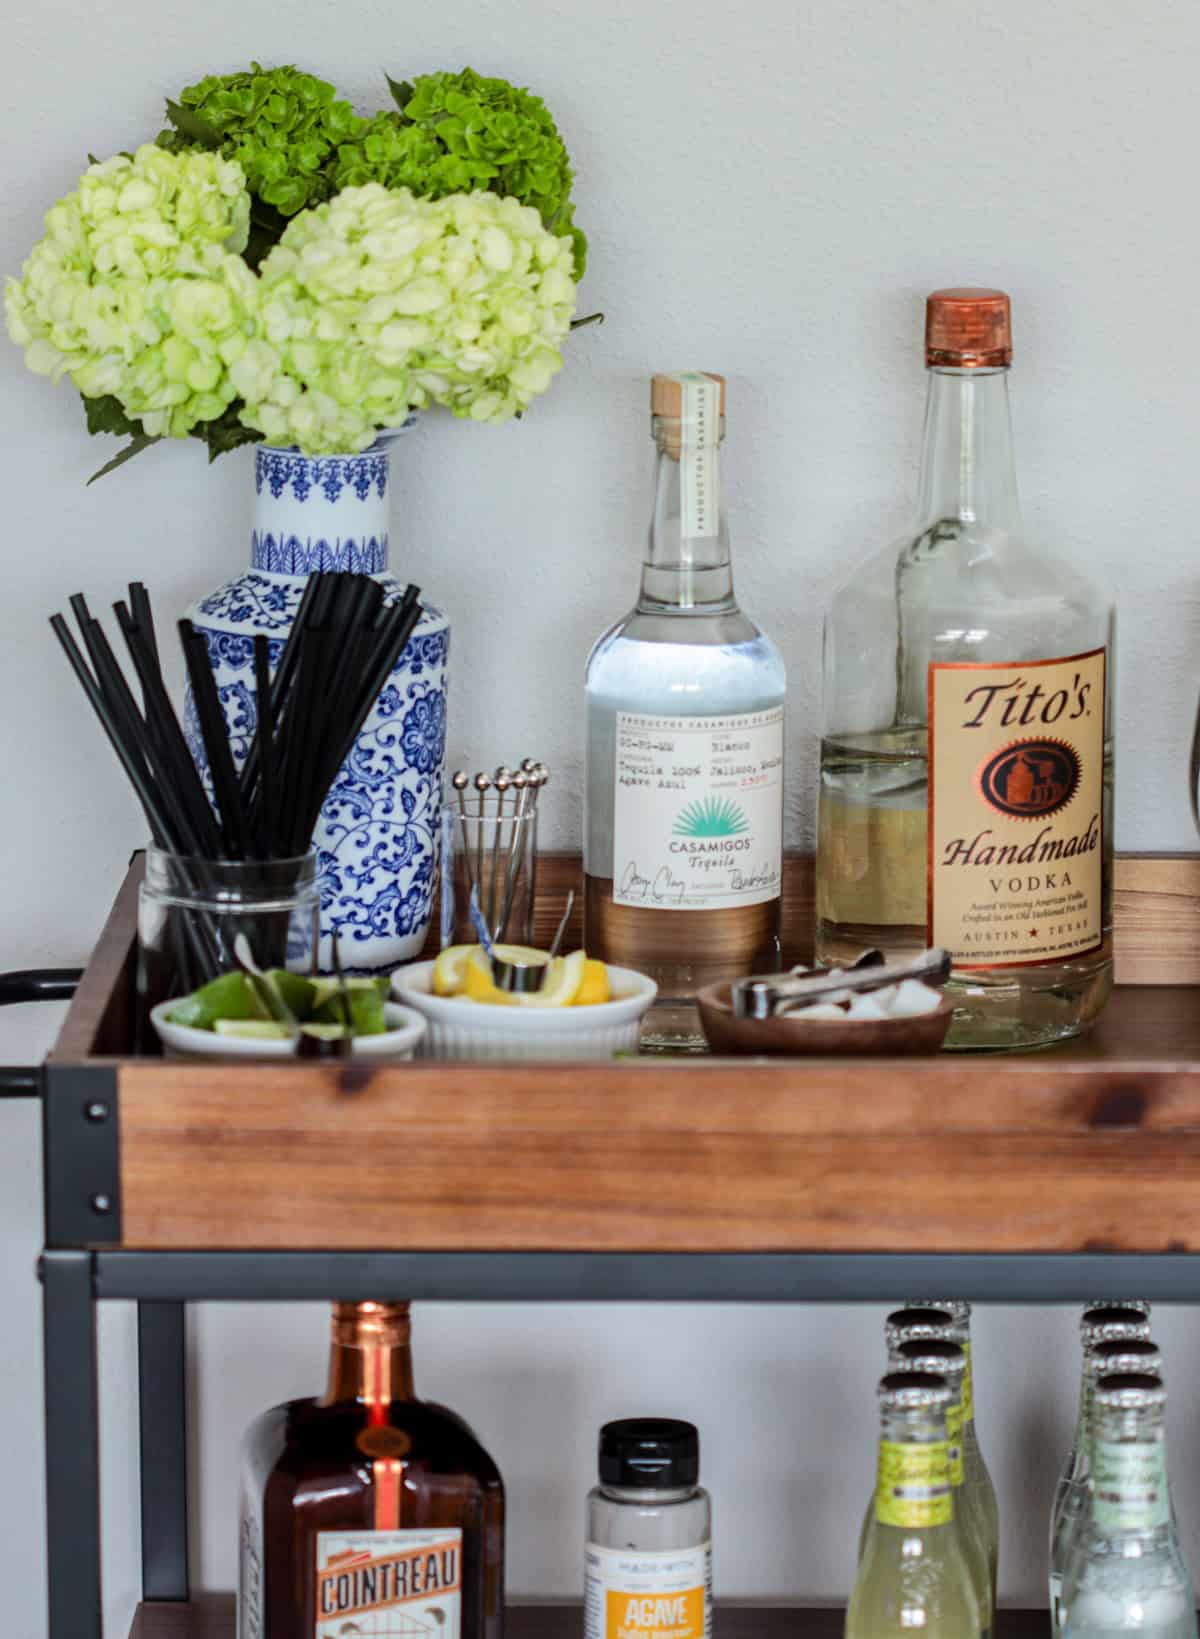 Summer inspired bar cart with fresh flowers and alcohol.